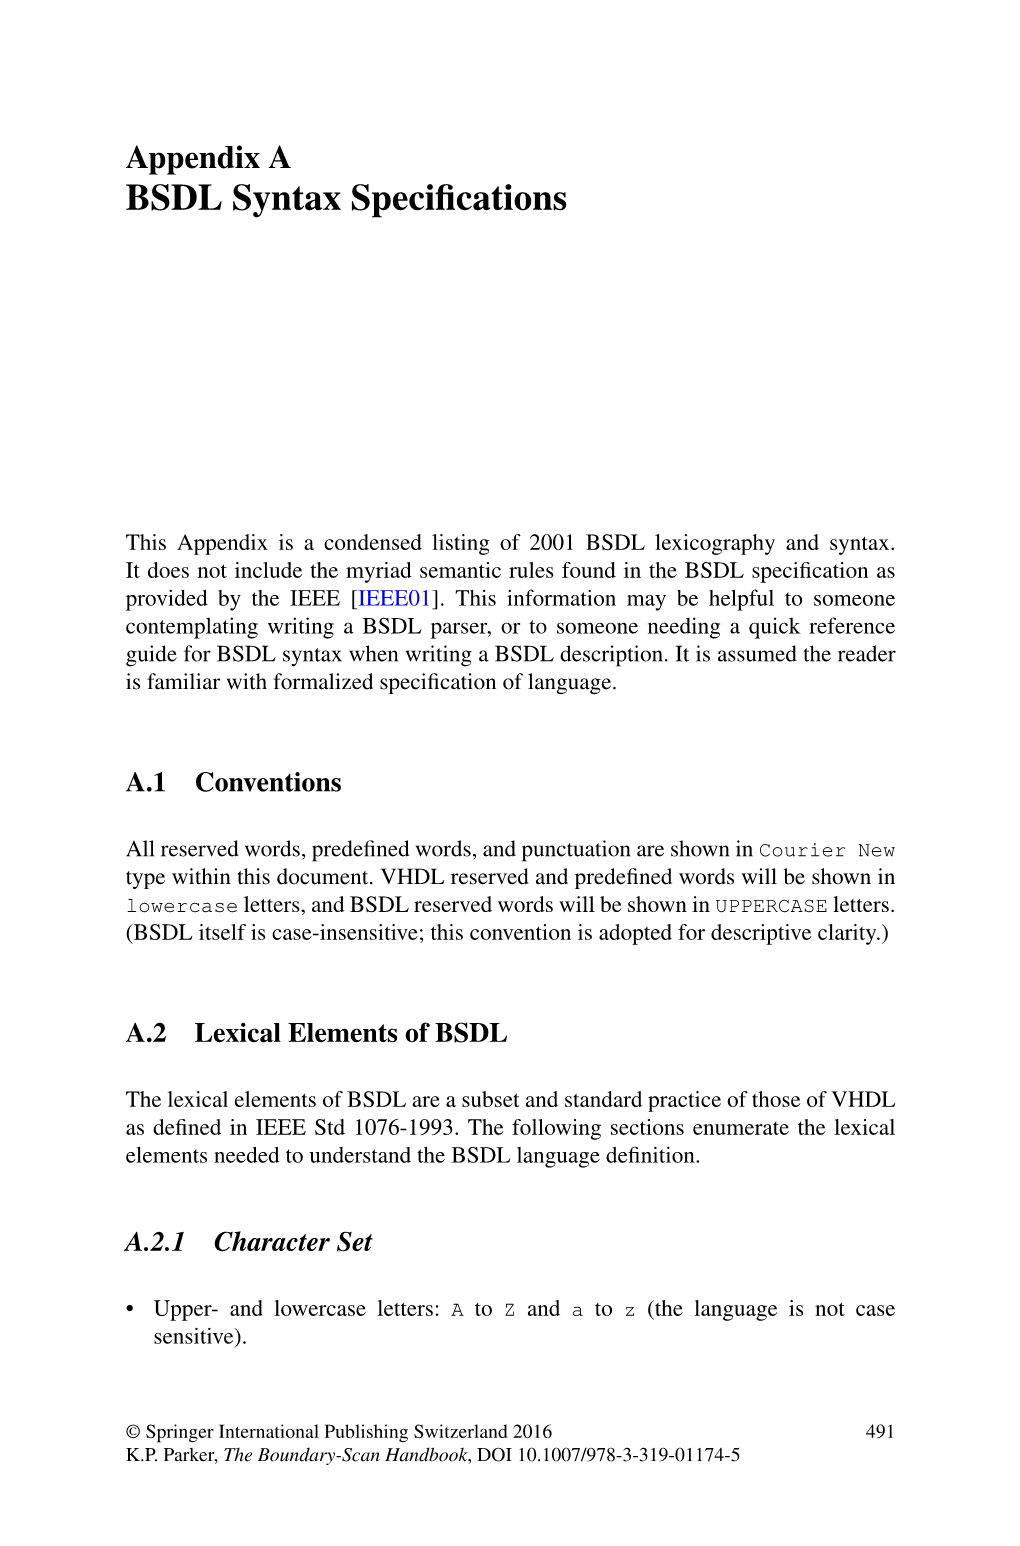 BSDL Syntax Specifications